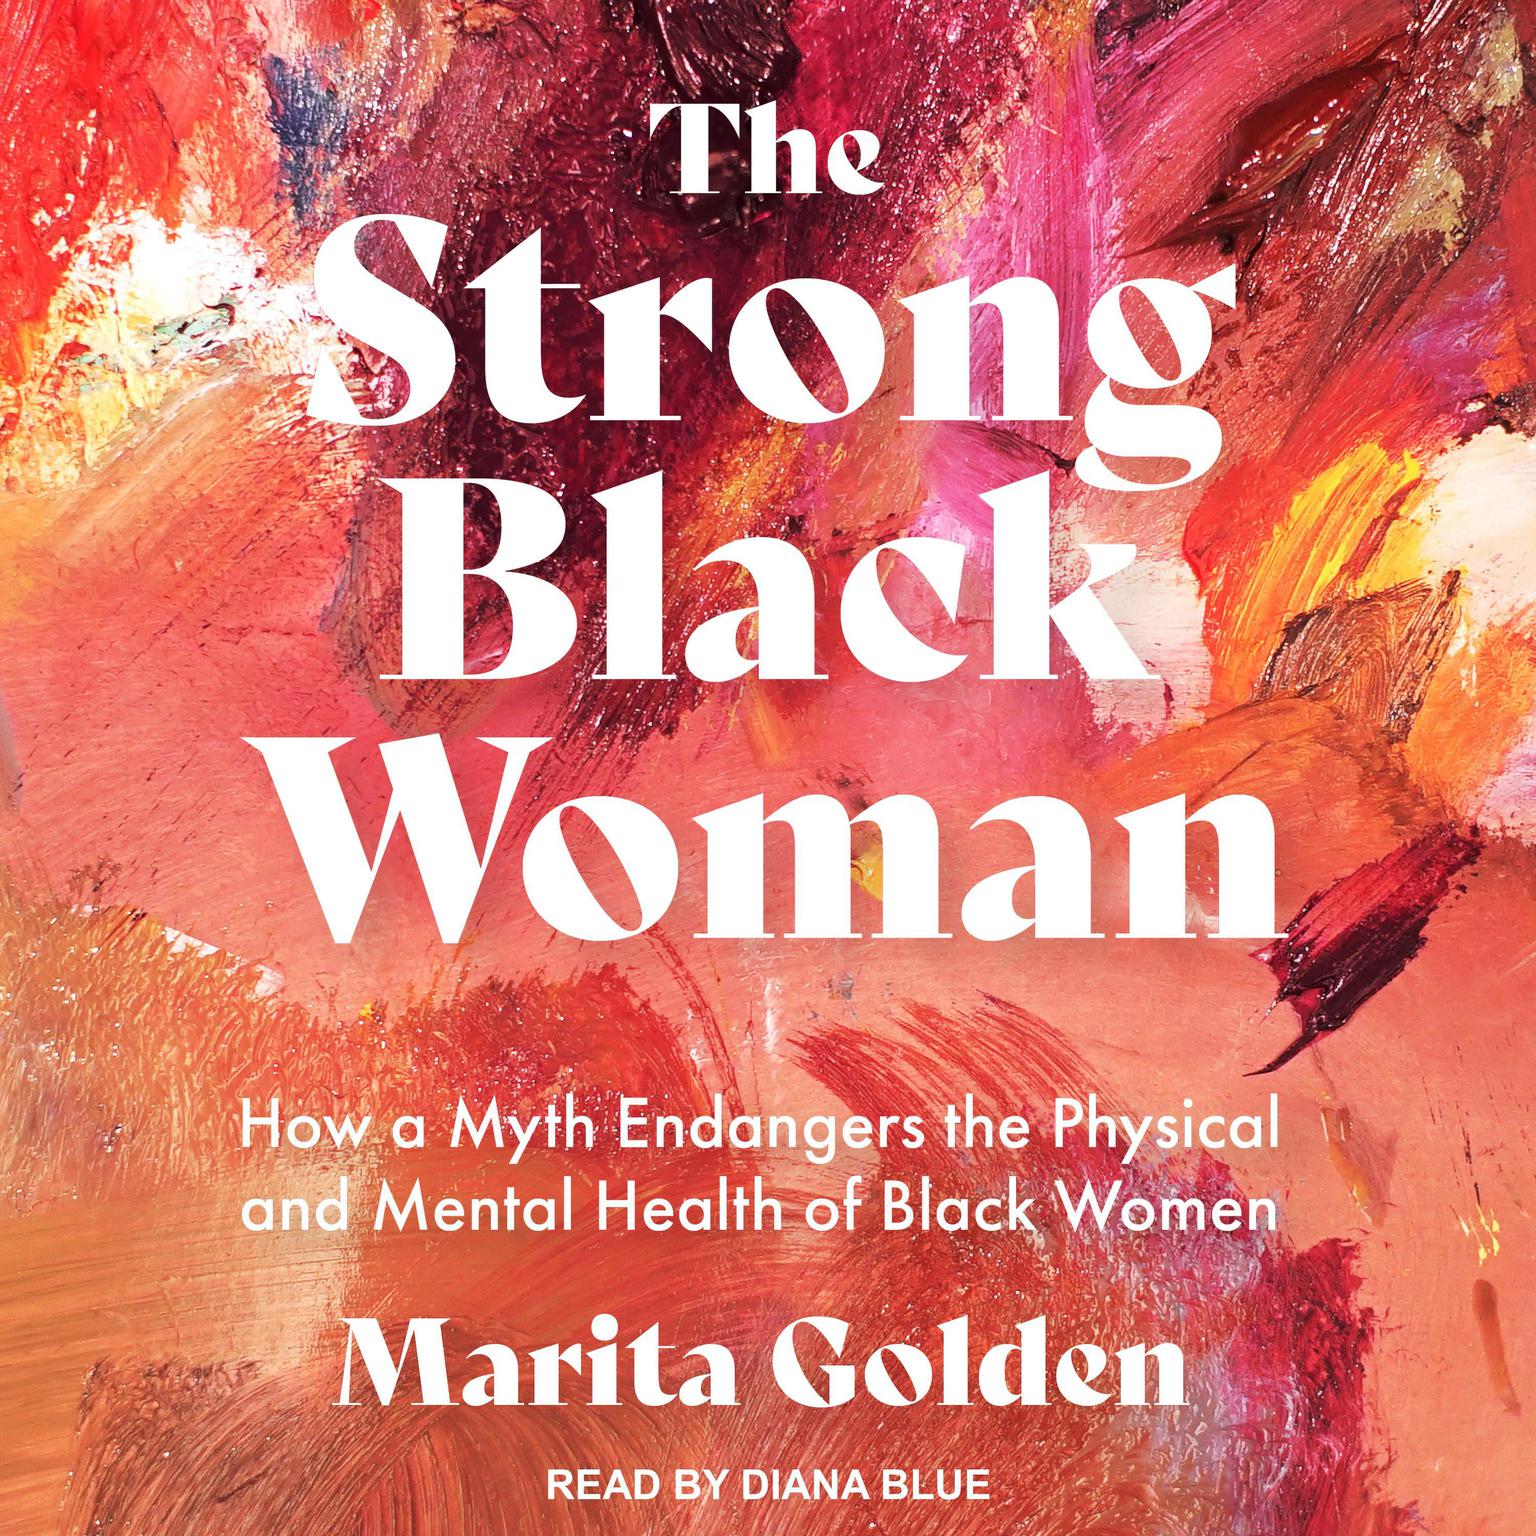 The Strong Black Woman: How a Myth Endangers the Physical and Mental Health of Black Women Audiobook, by Marita Golden